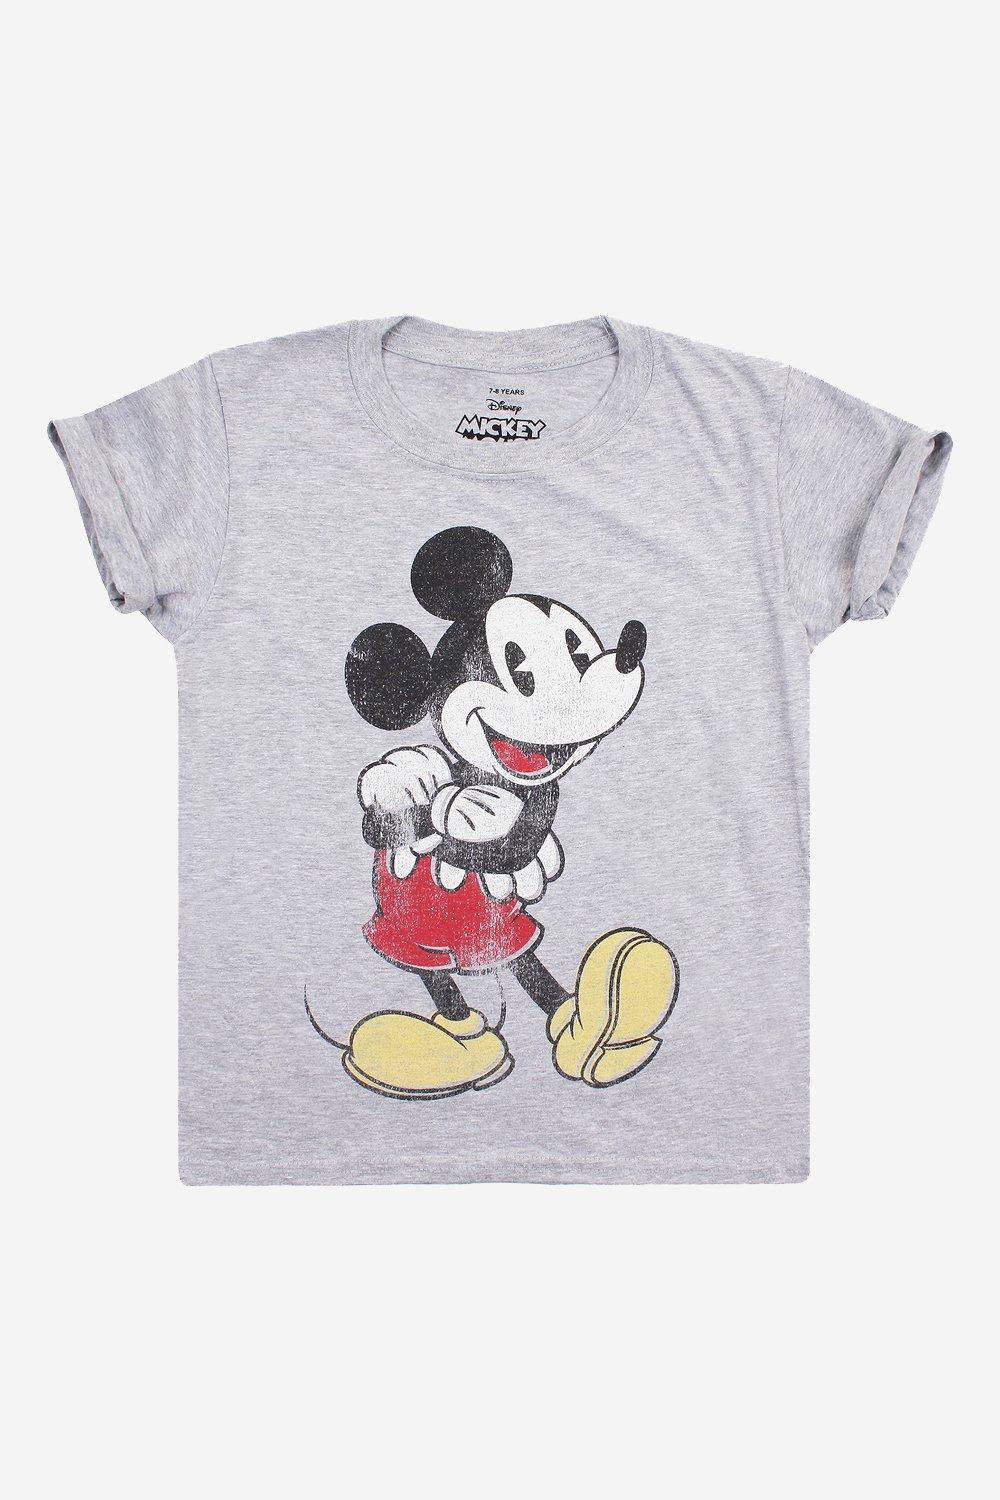 Mickey Mouse Vintage T-shirt